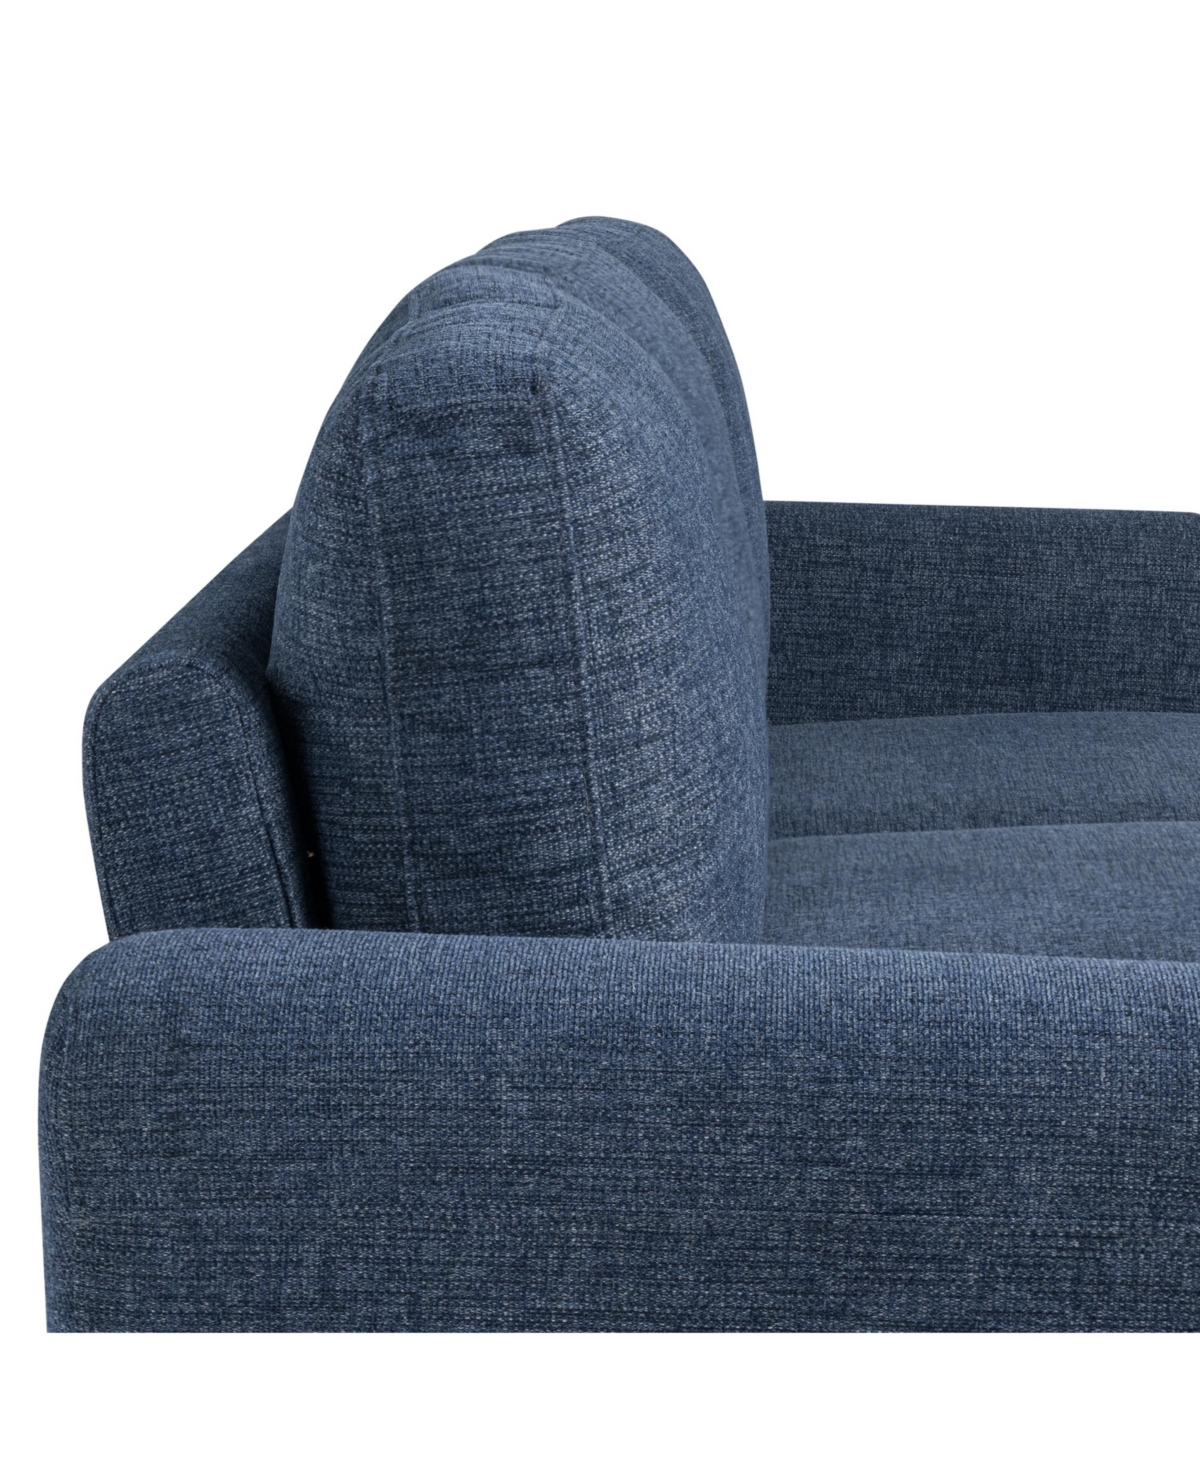 Shop Lifestyle Solutions 80.3"w Polyester Microfiber Sofa With Rolled Arms In Blue